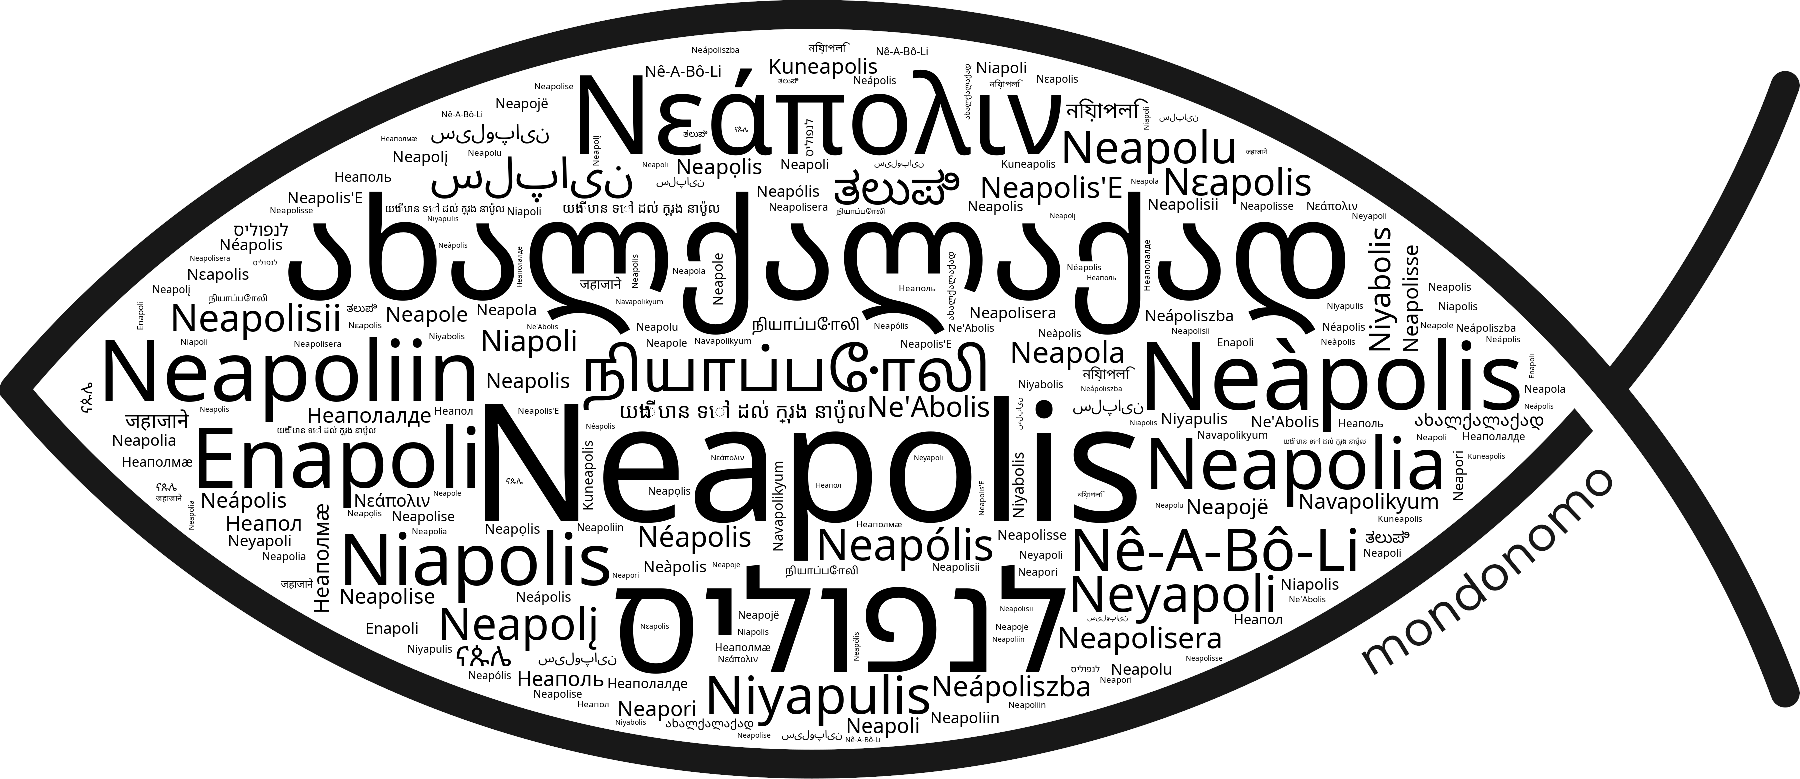 Name Neapolis in the world's Bibles